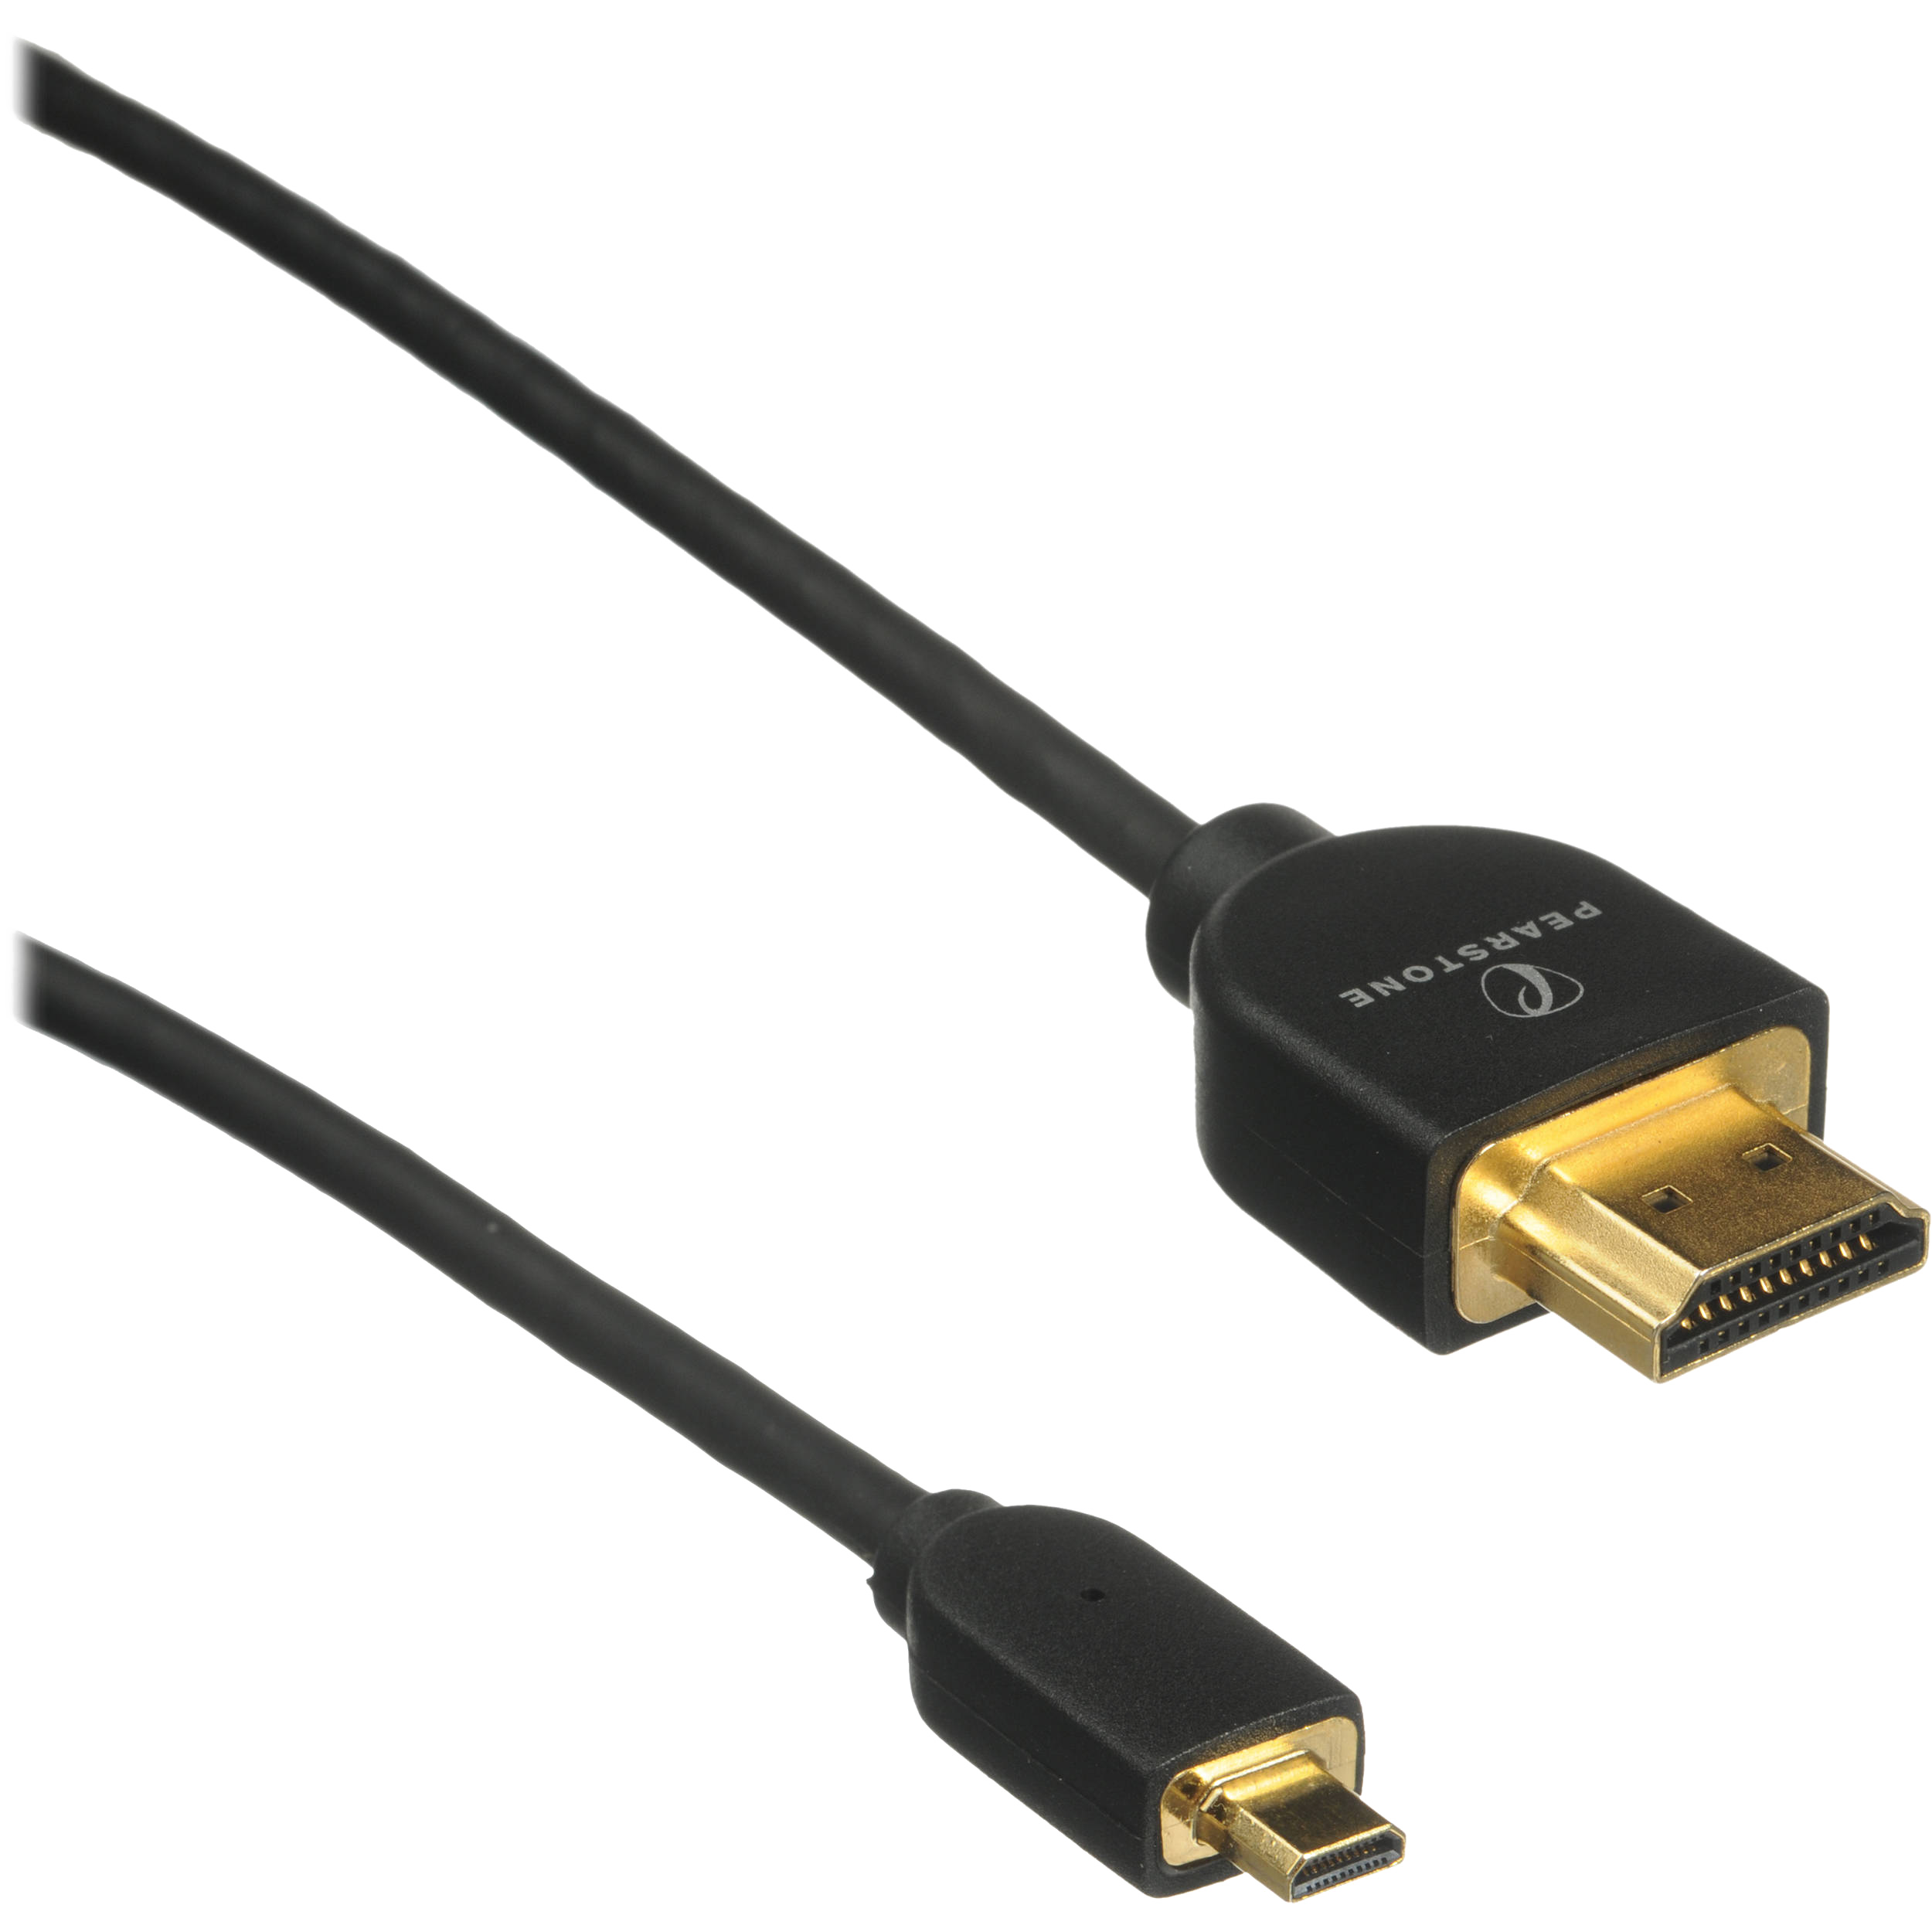 HDMI Cable PNG Background Image SVG Clip arts